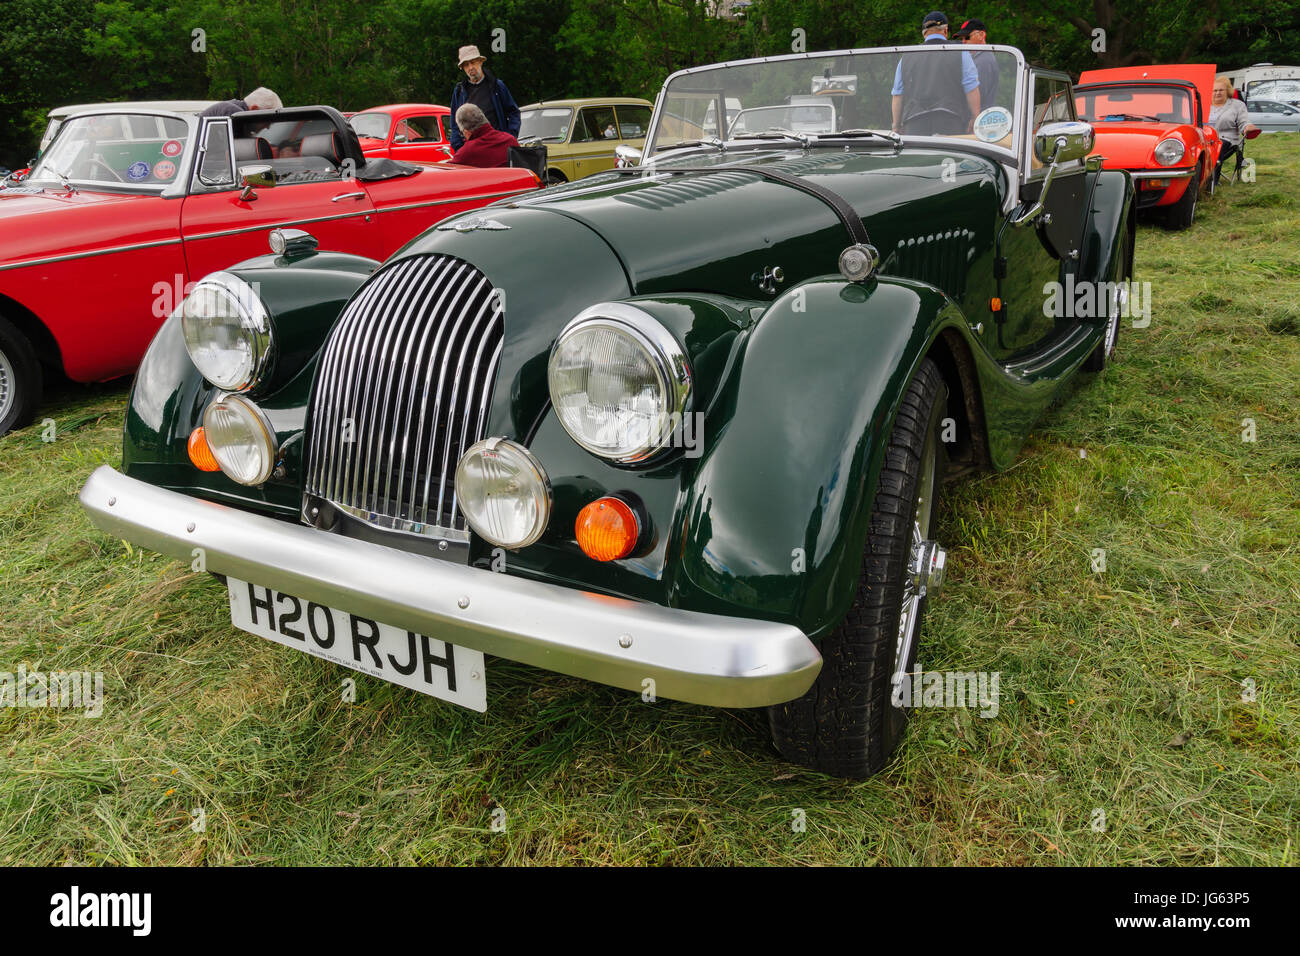 Morgan 4/4 1600 two door roadster convertible a classic British car first built in 1936 Stock Photo